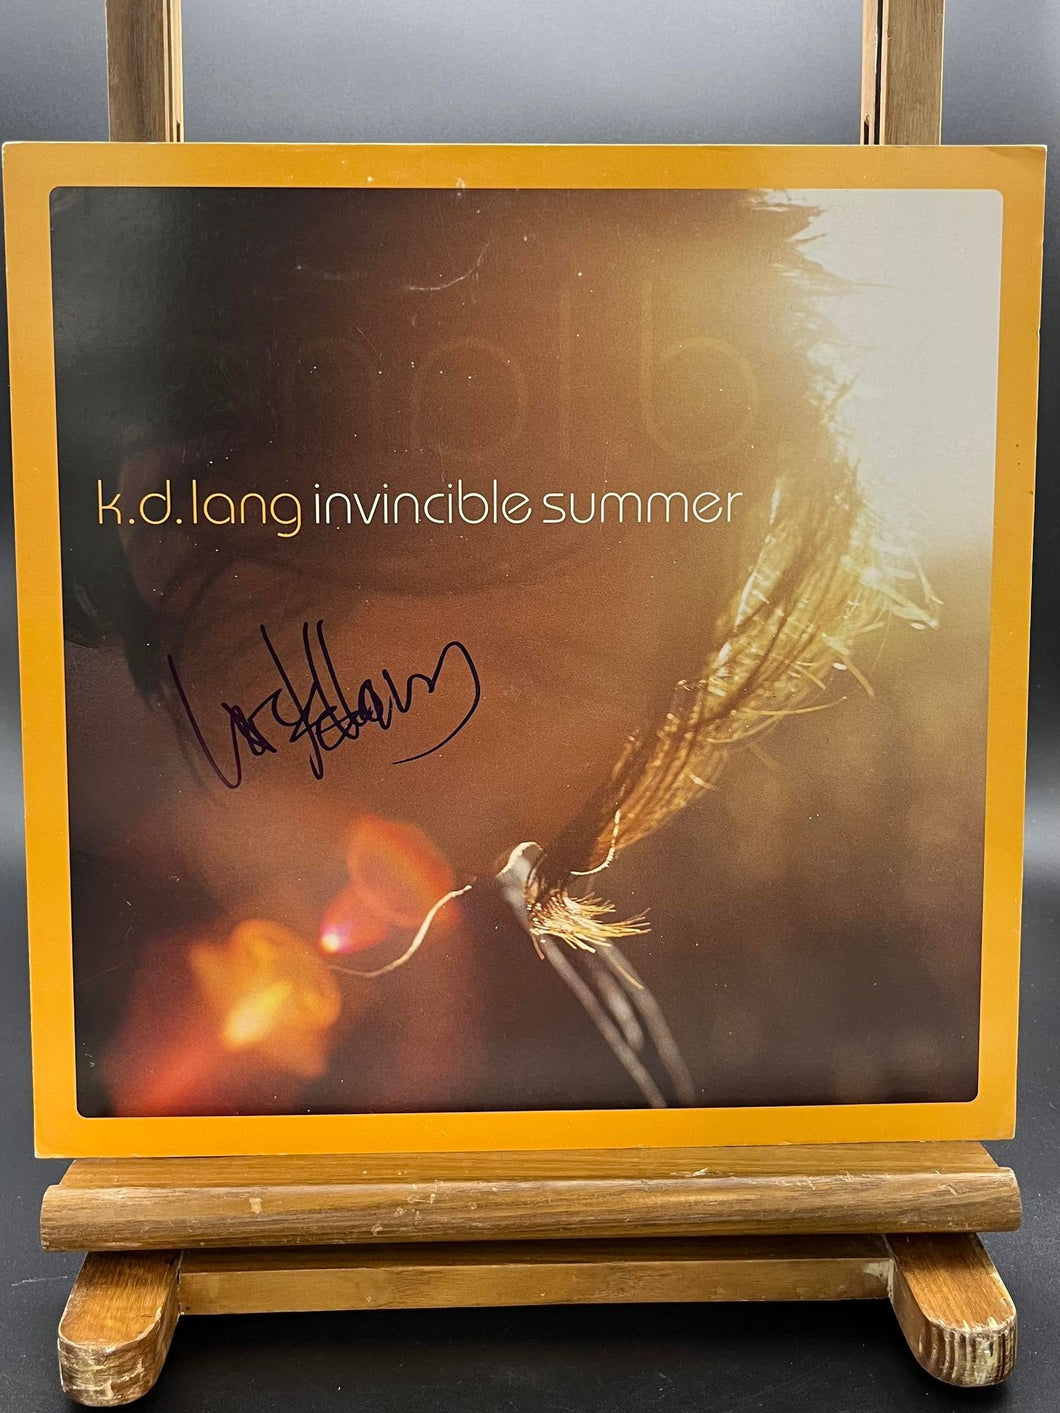 k.d. lang Promo Card Personally Signed by k.d lang